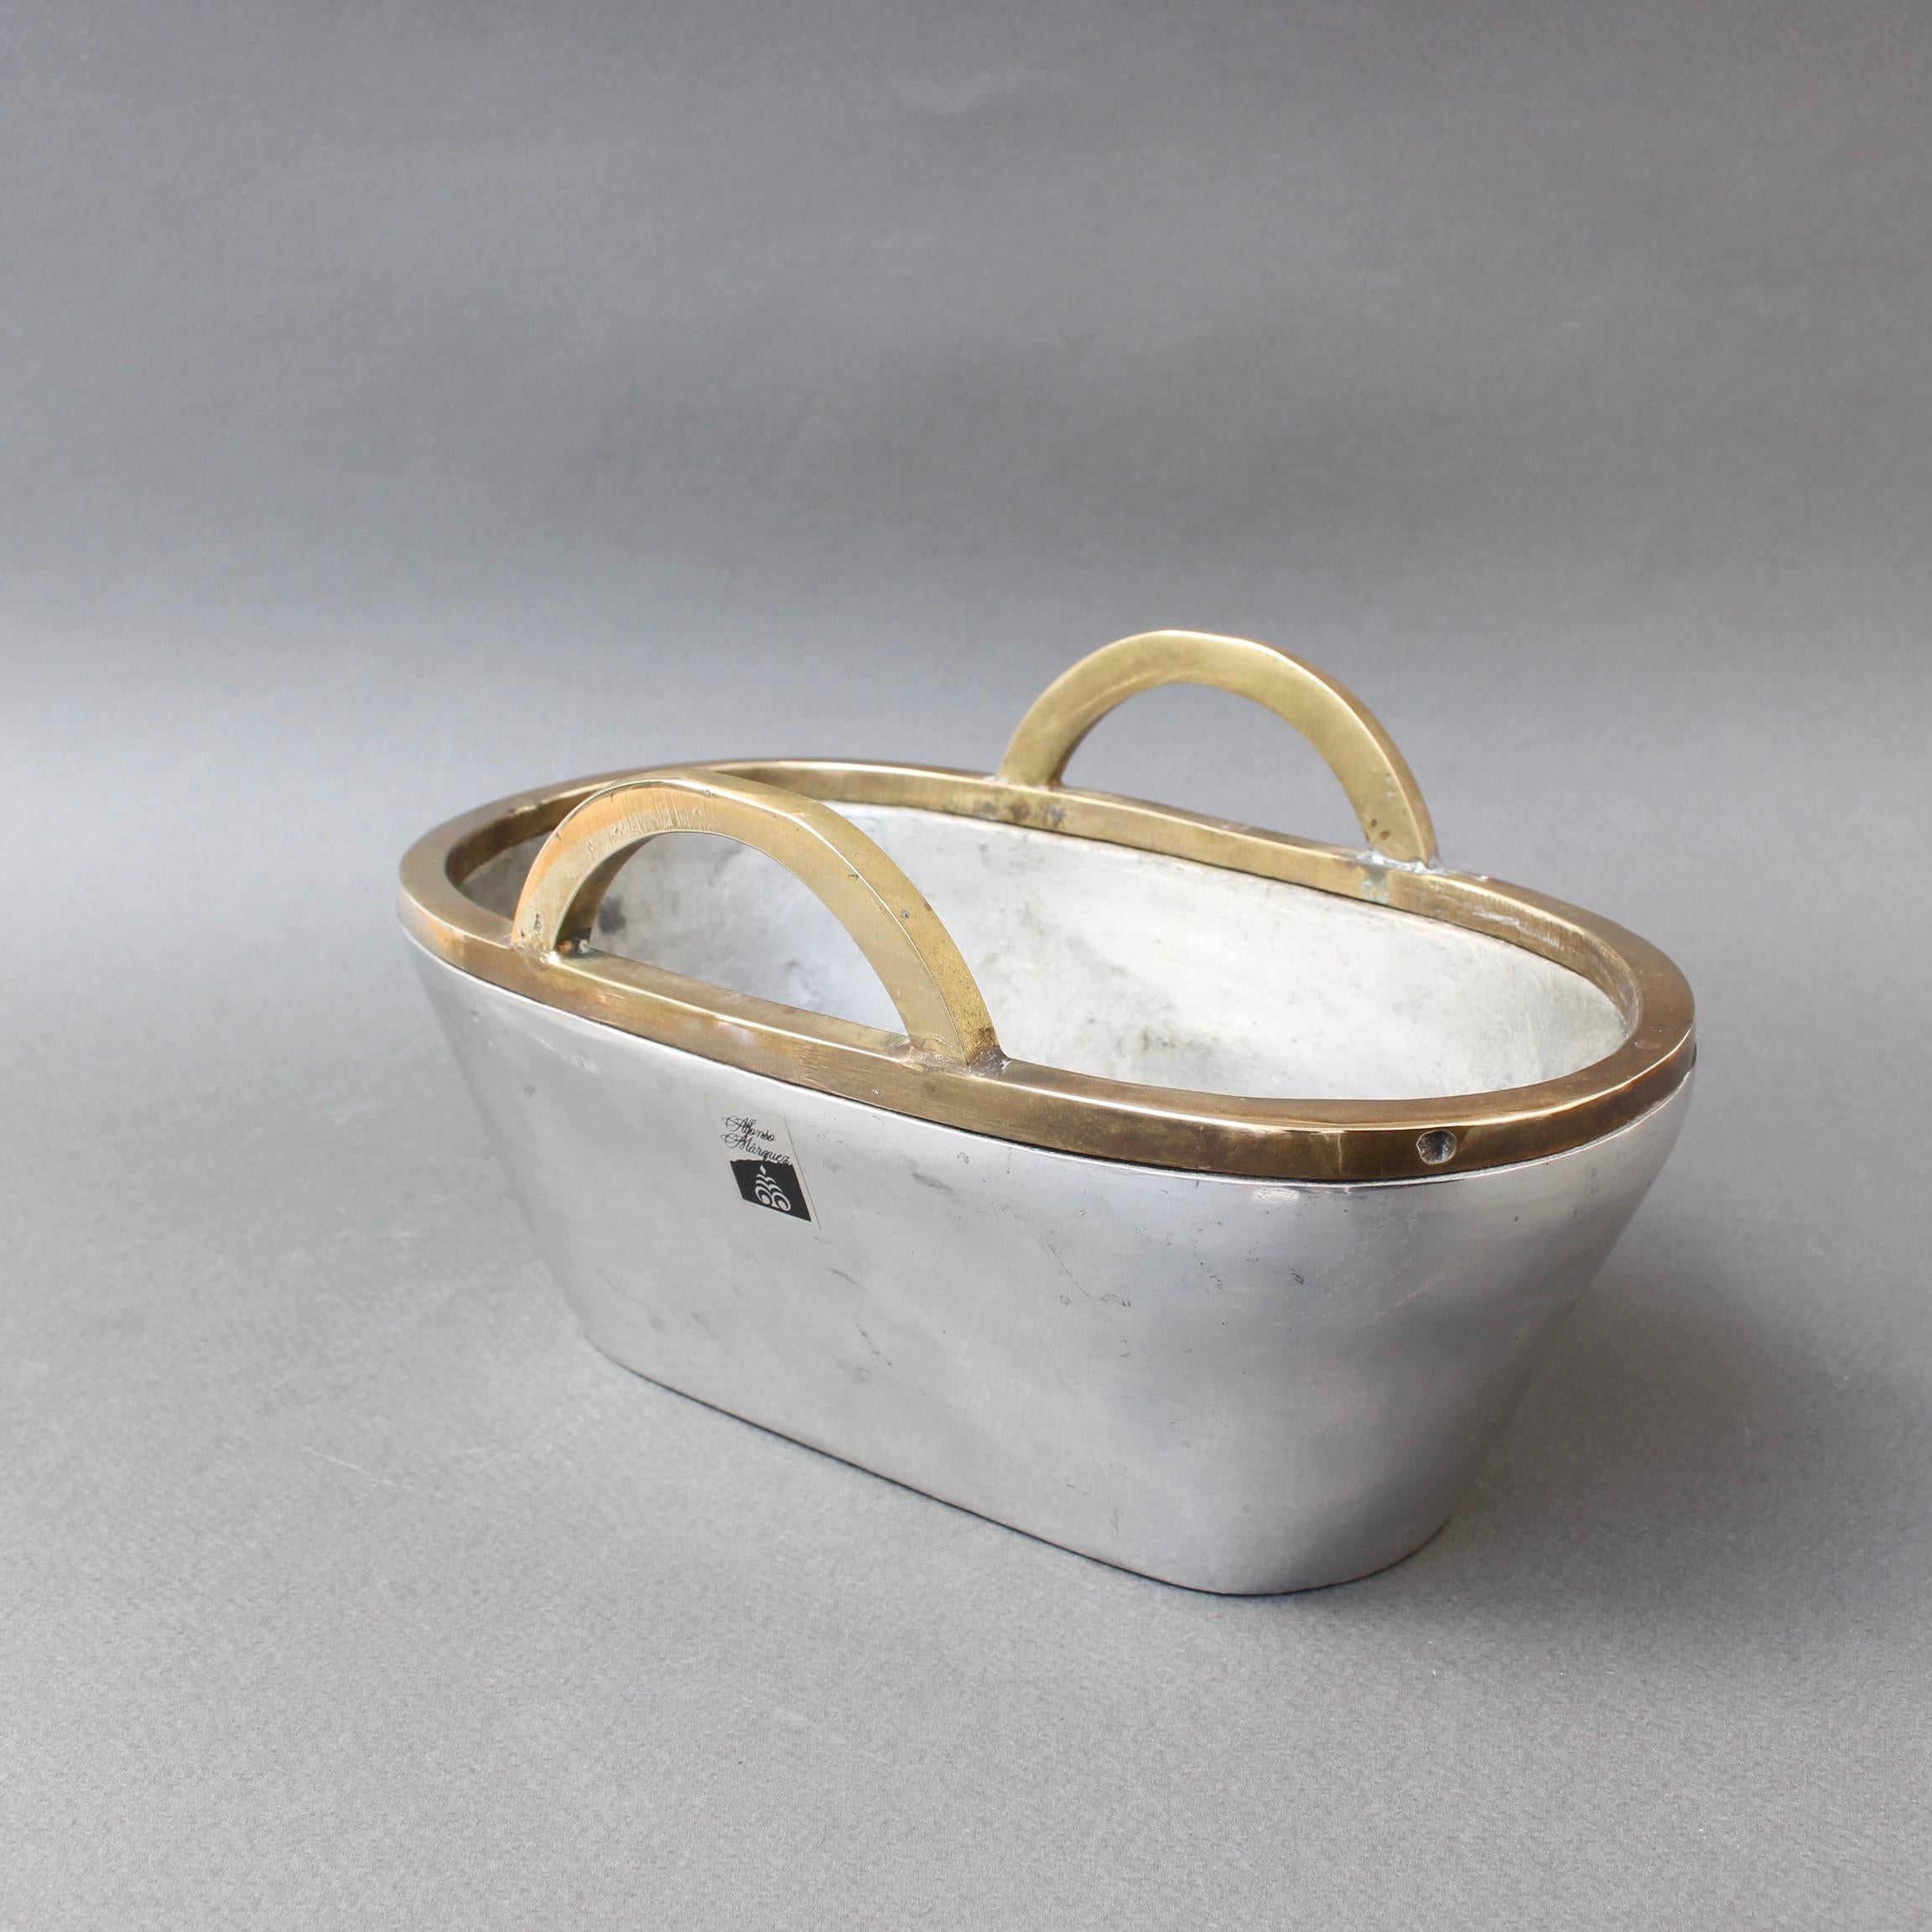 Aluminium and brass Brutalist style vide-poche by Alfonso Marquez (in the style of David Marshall). Weighty and wonderfully tactile, this bowl is decoratively in the shape of a basket but entirely in brass and aluminium. Imagine the piece in your